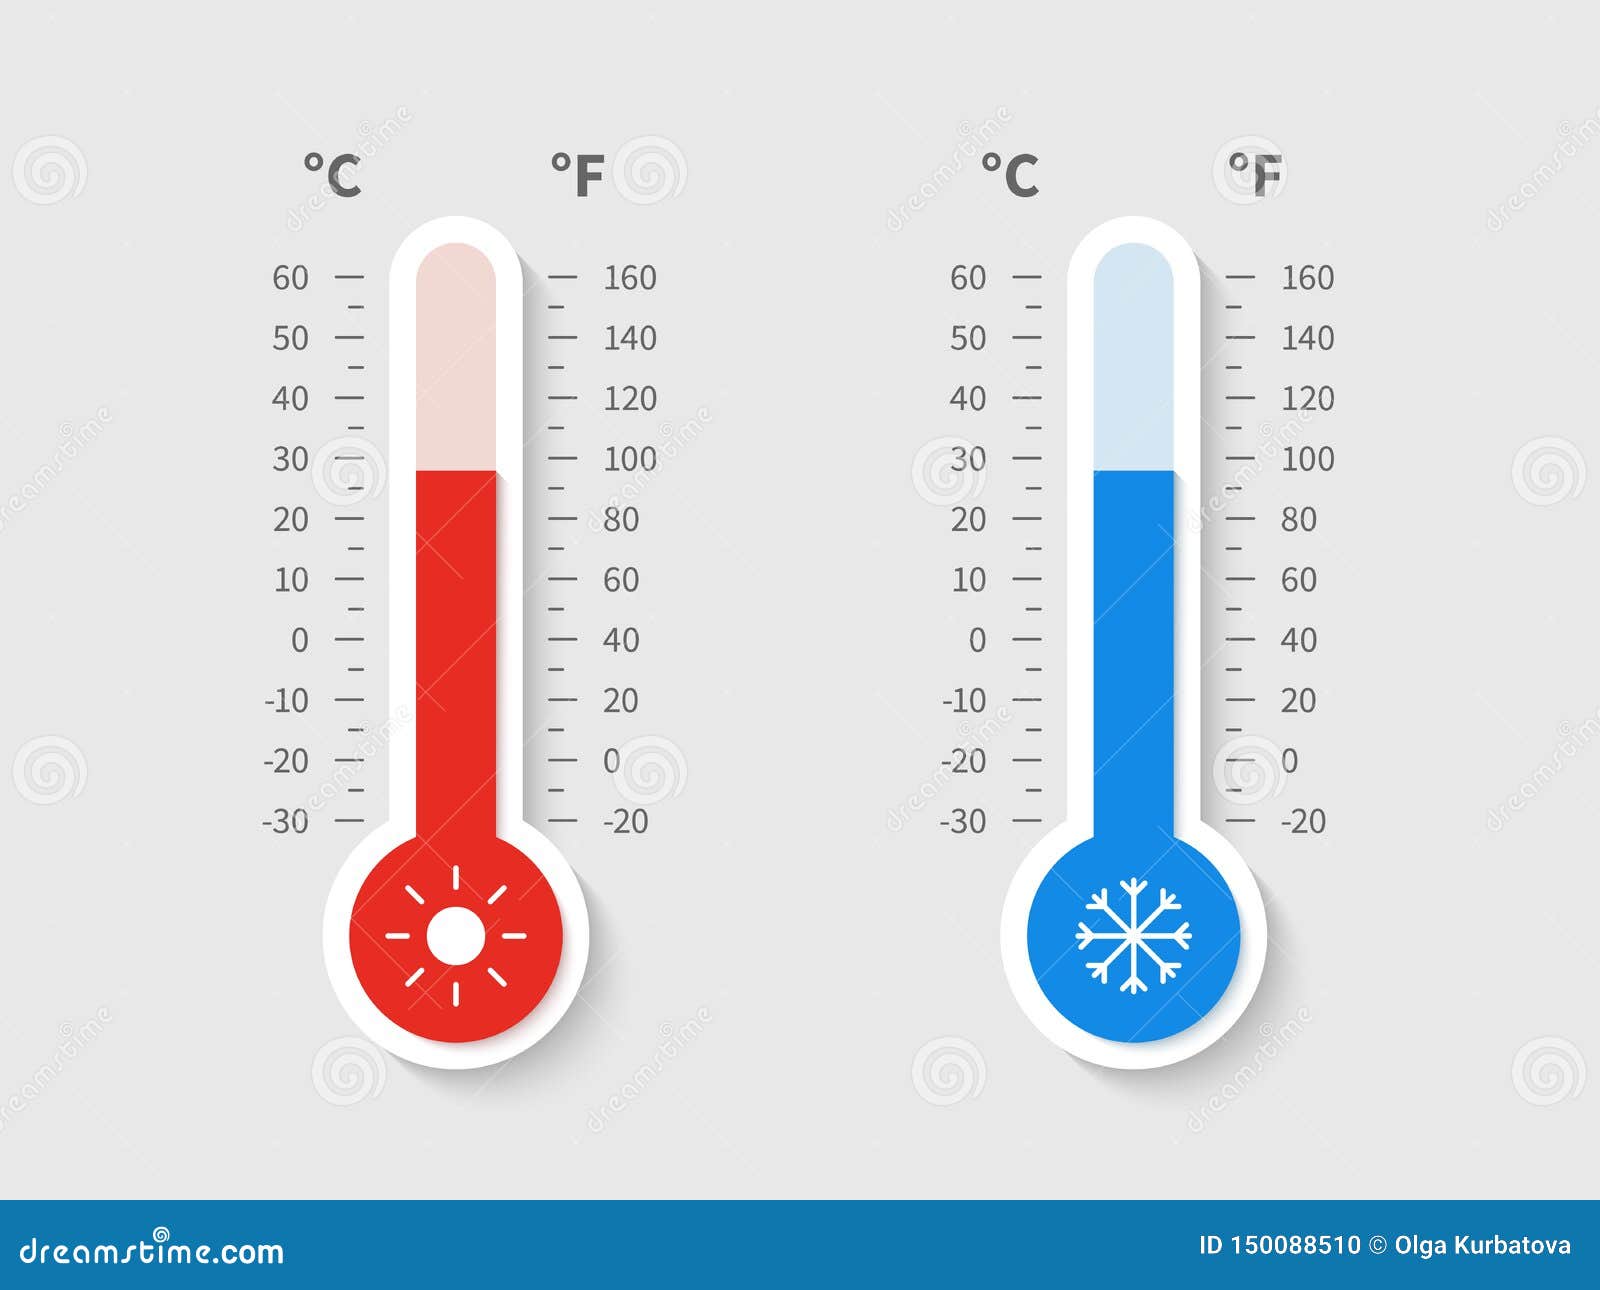 cold warm thermometer. temperature weather thermometers celsius fahrenheit meteorology scale, temp control device flat